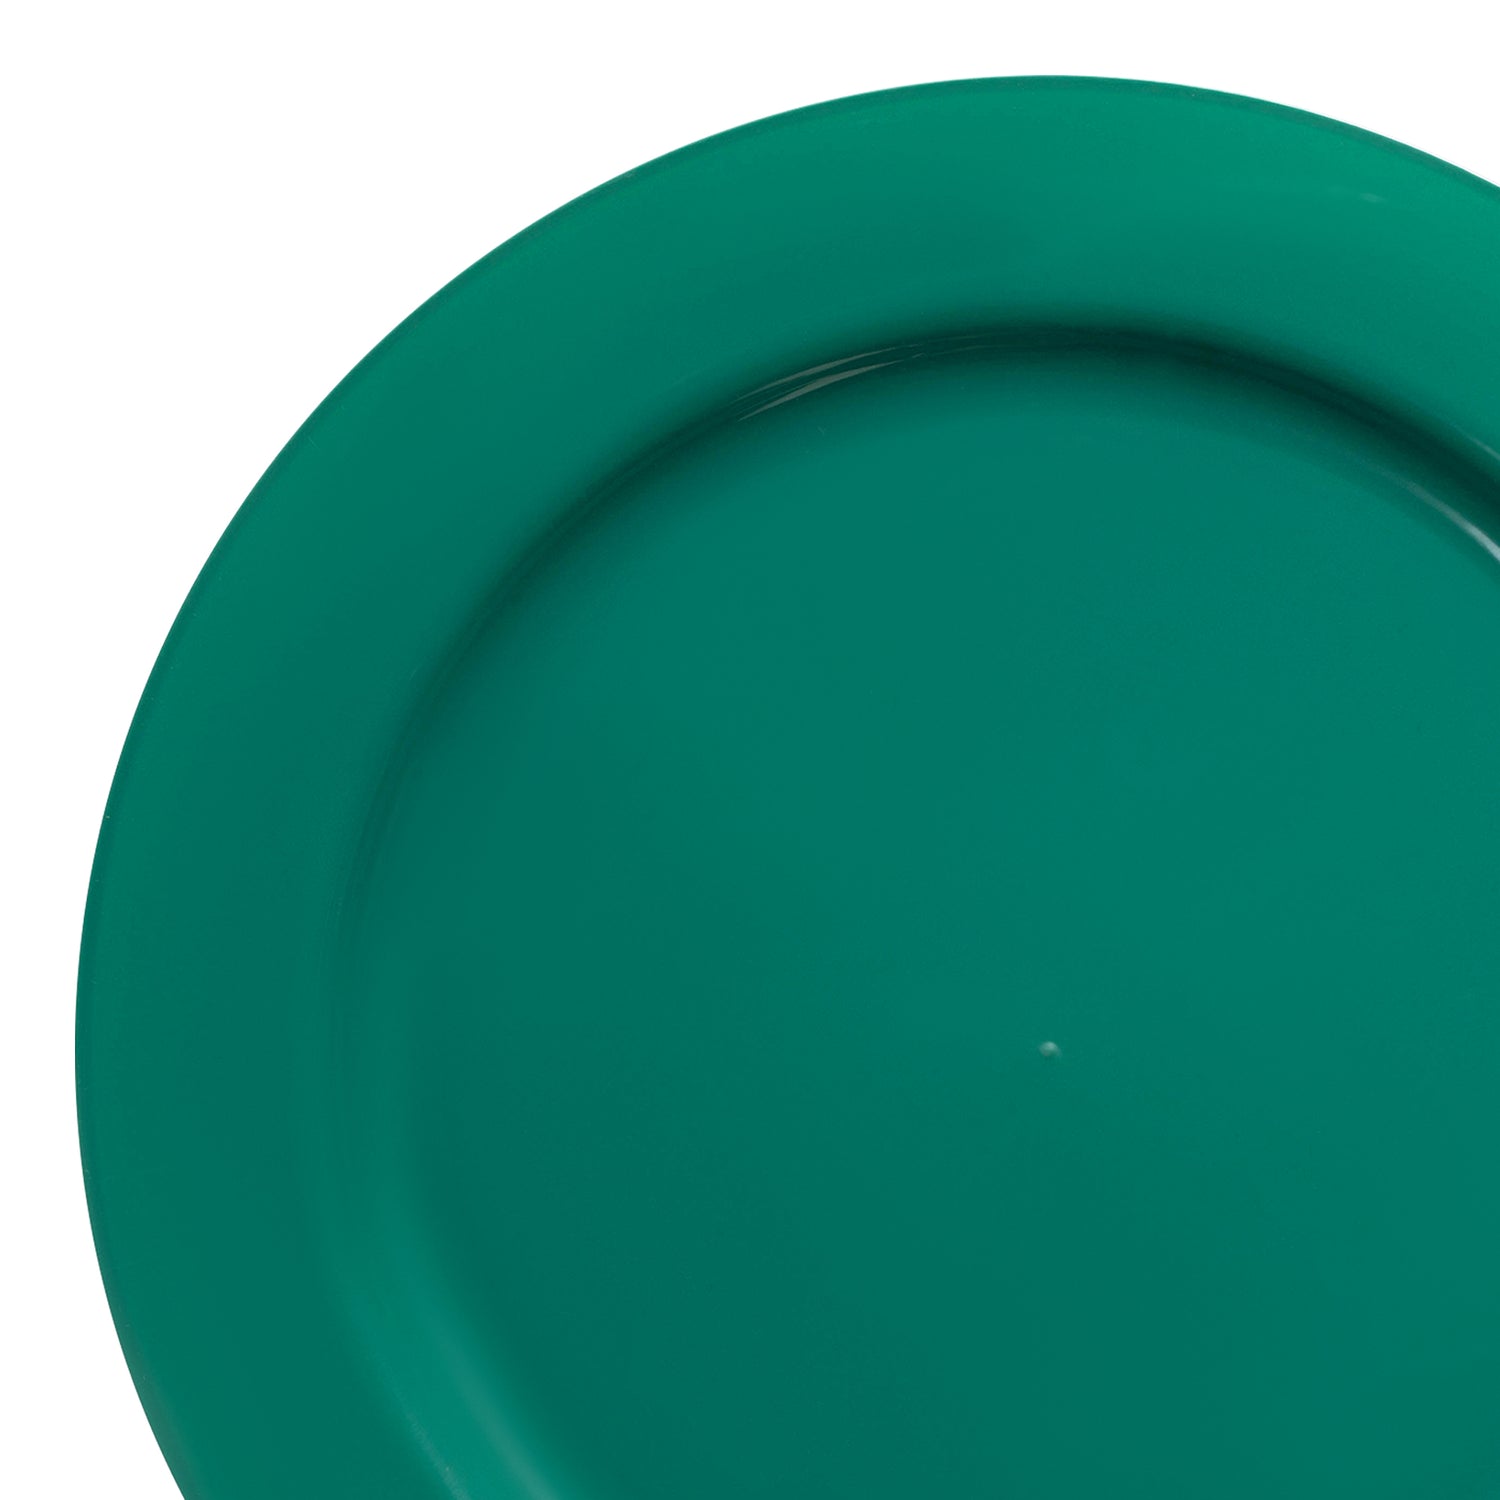 Solid Green Holiday Round Plastic Disposable Dinner Plates | The Kaya Collection